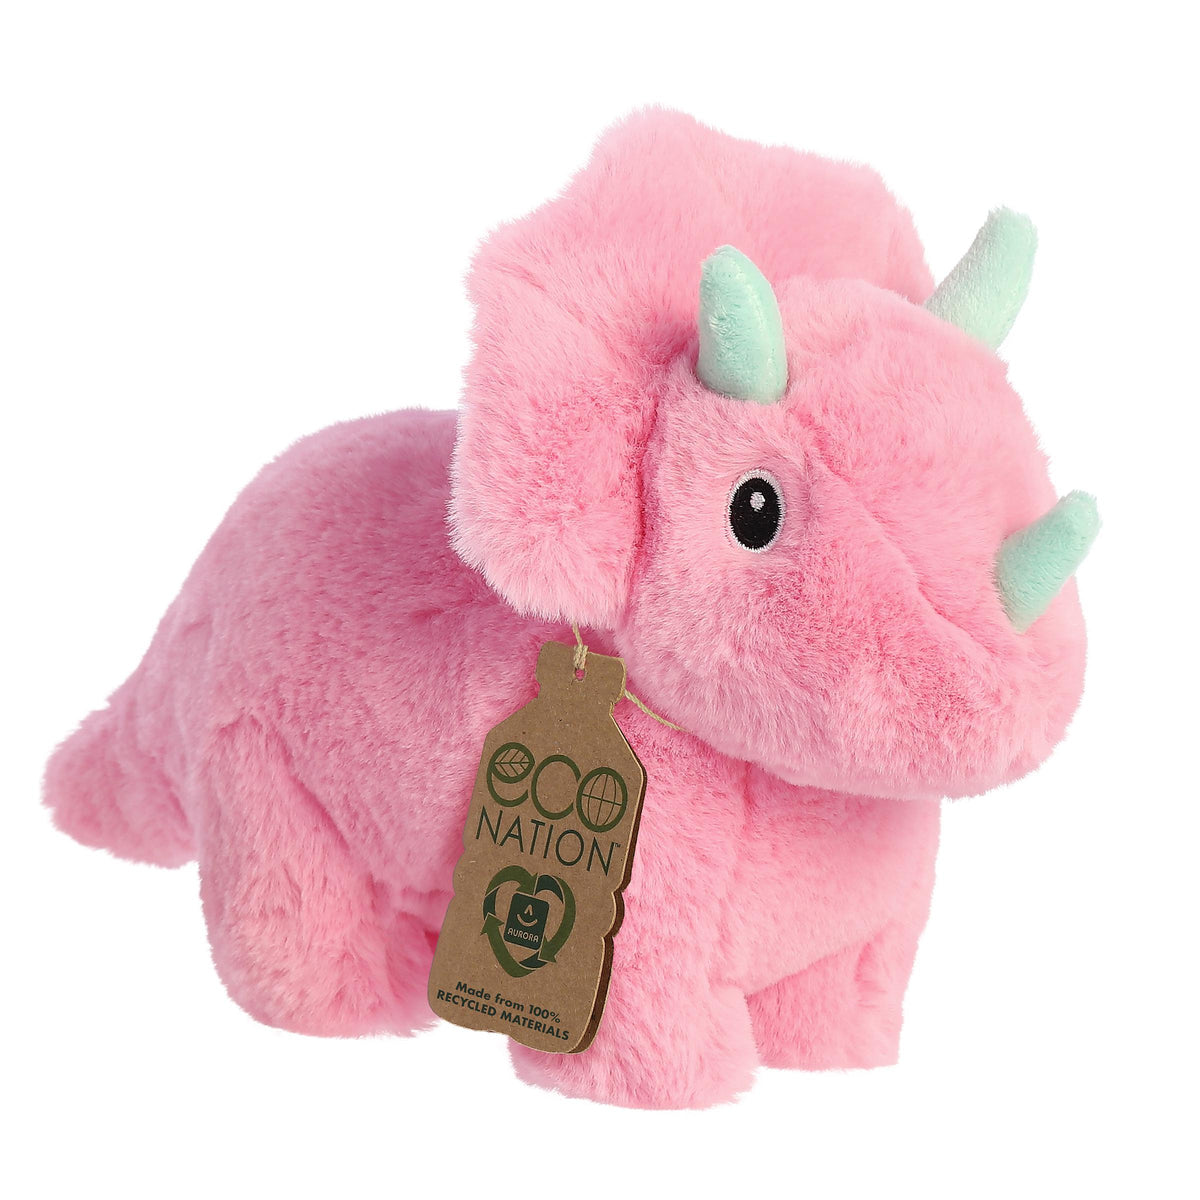 Alluring dino triceratops plush with a bright pink body and blue horns, embroidered eyes, and an eco-nation tag